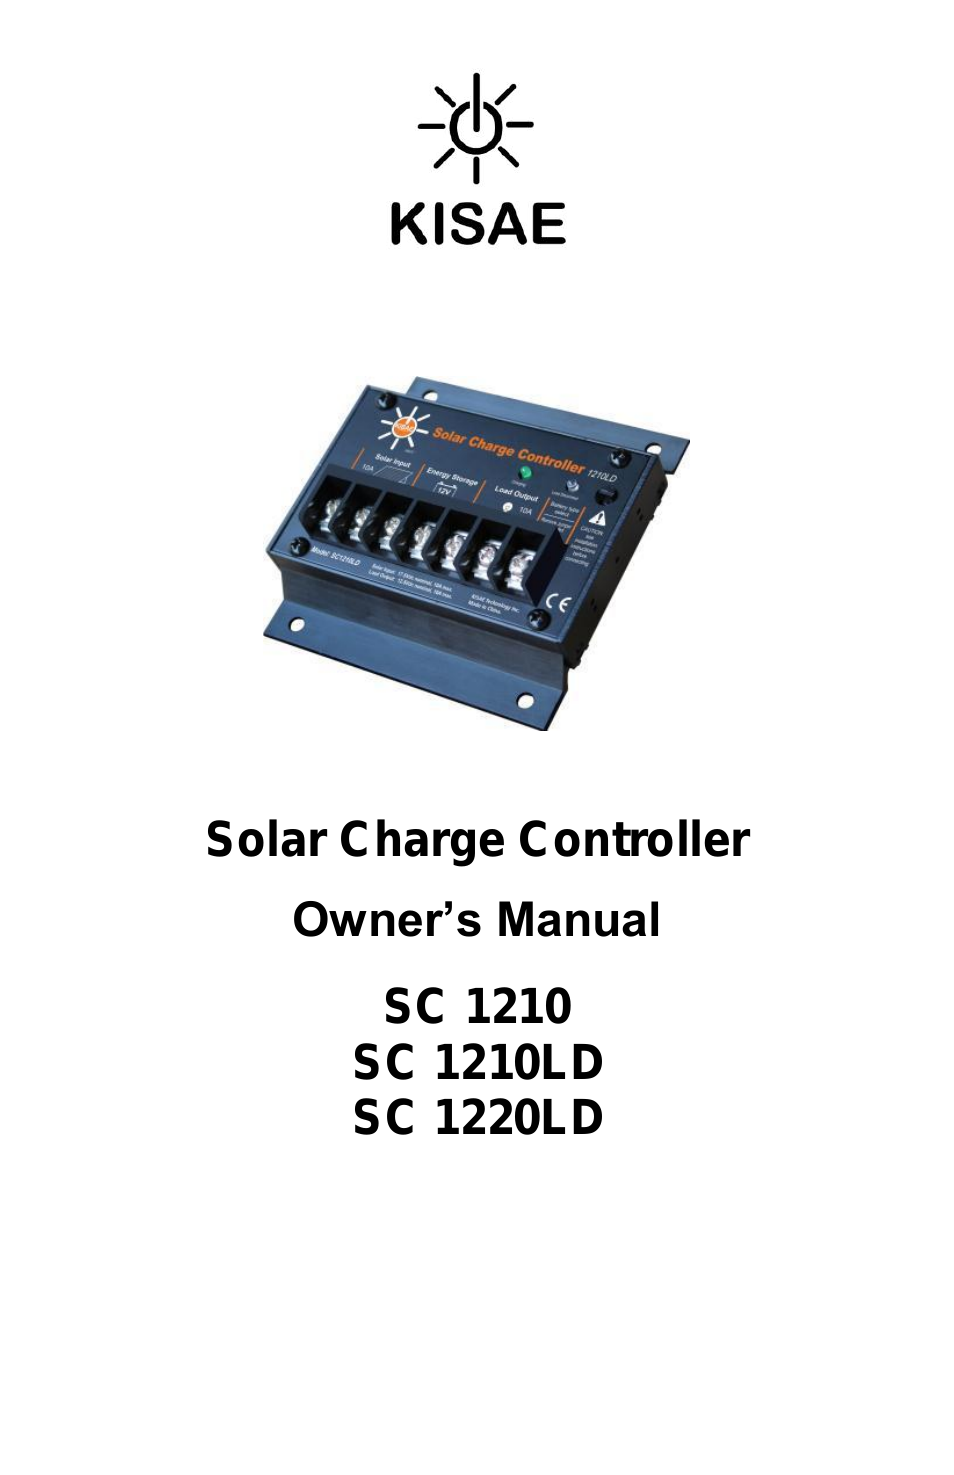 10A Solar Charge Controller (SC 1210 LD)